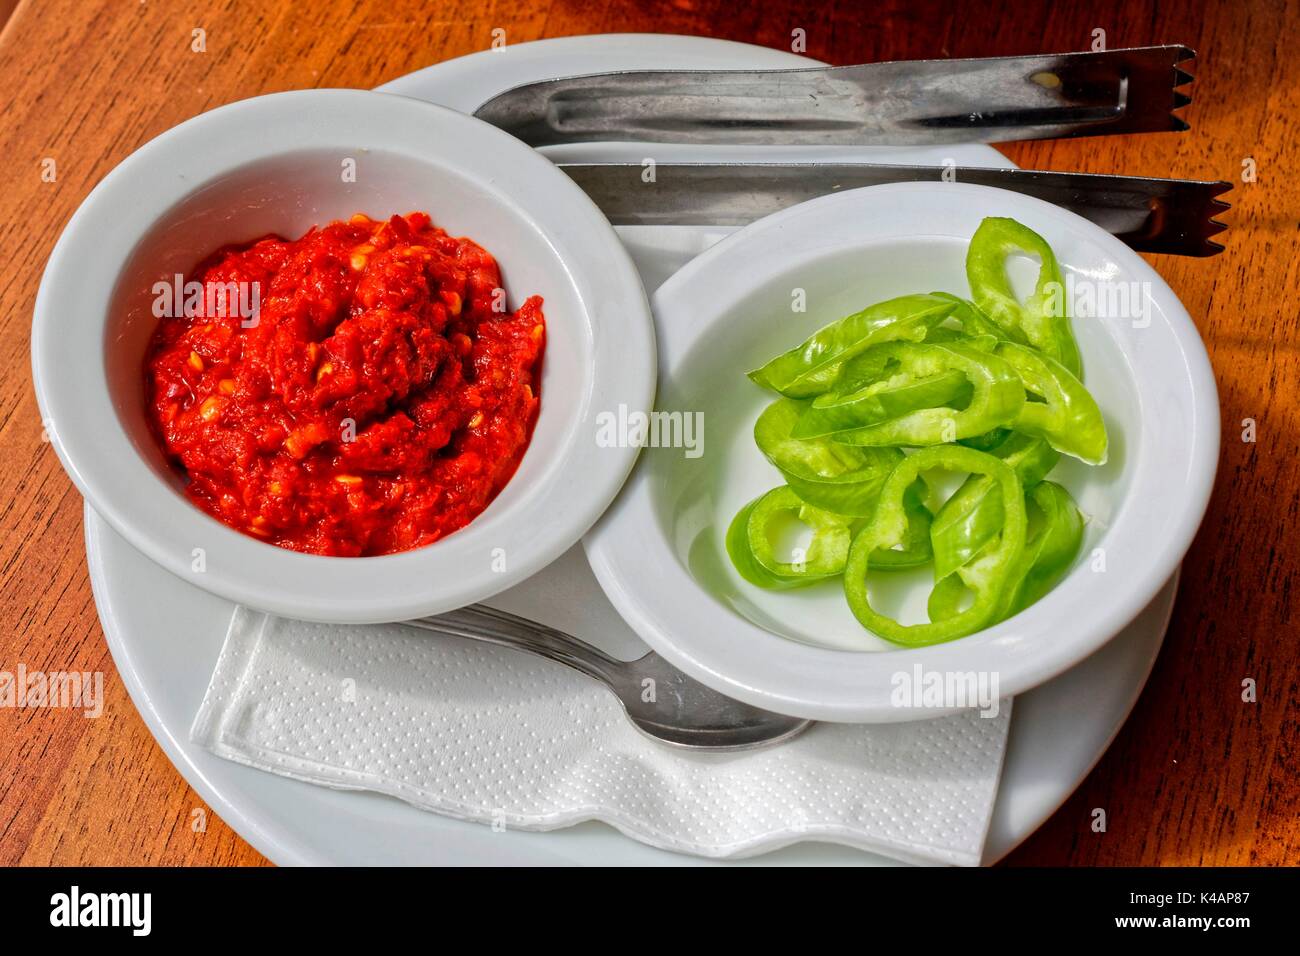 Hungarian Paprika Cream And Green Hot Peppers In Porcelain Dish Stock Photo